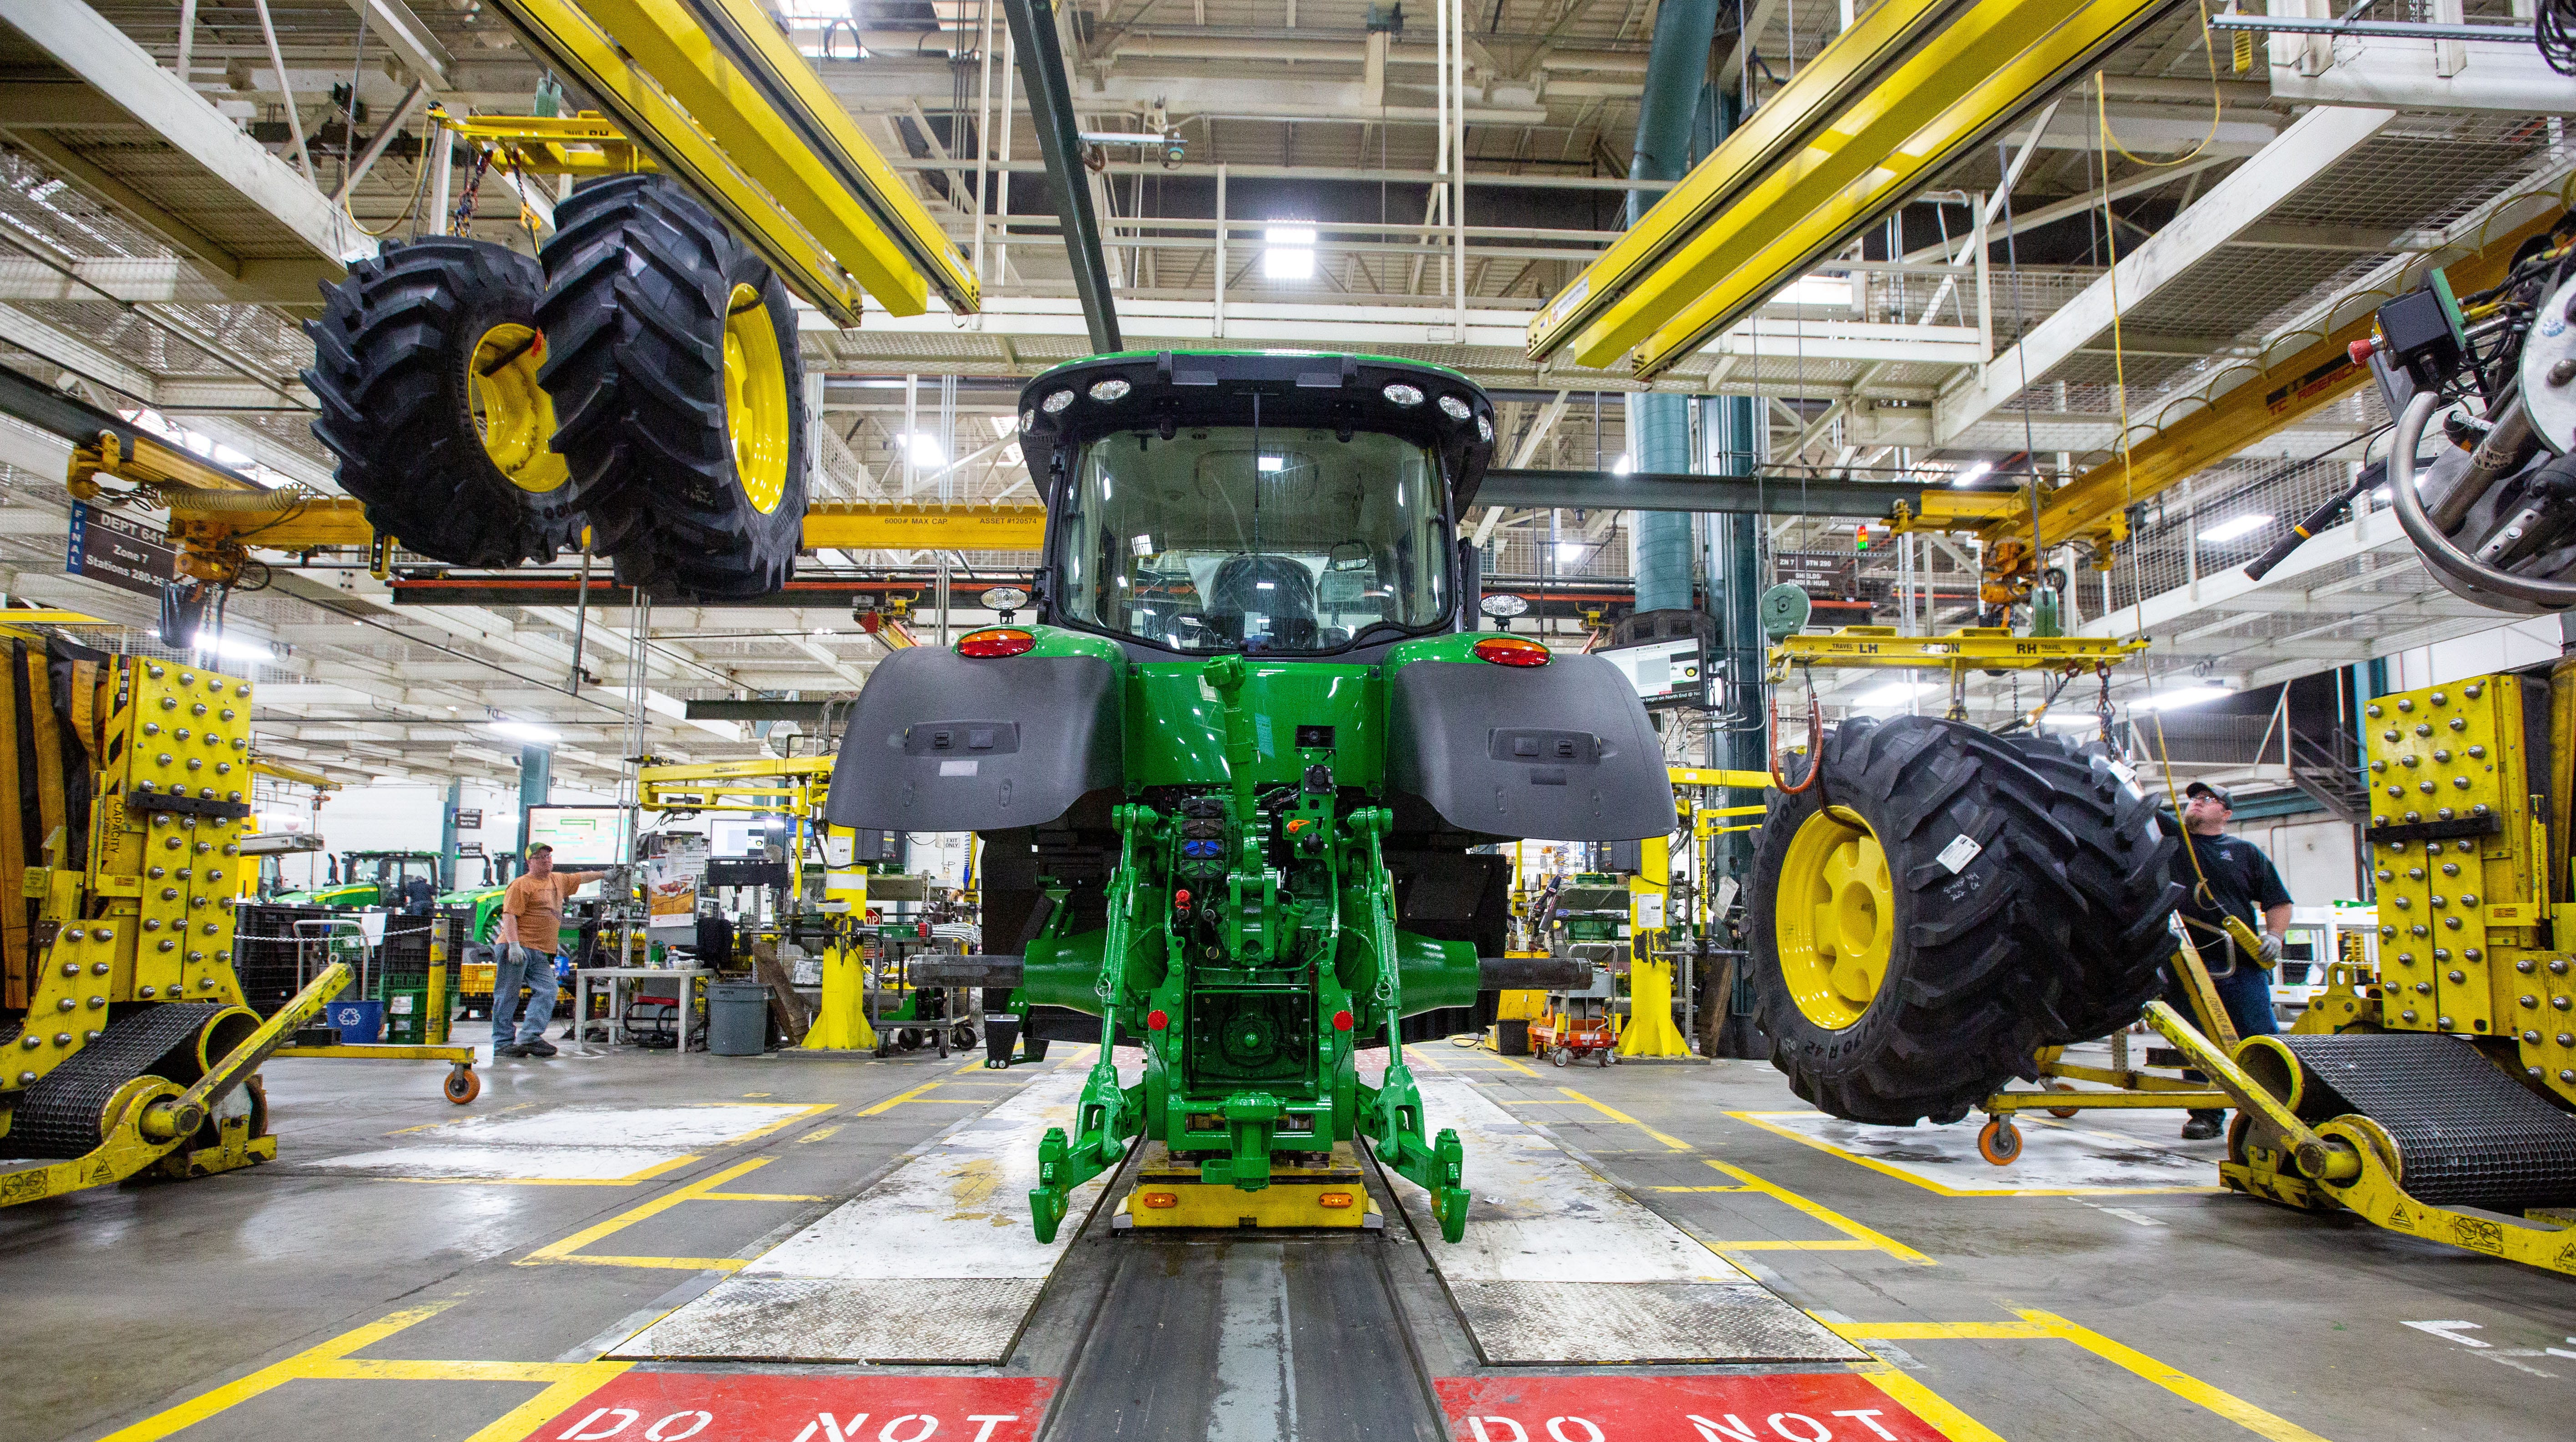 Wheels drop down from above as workers assemble a tractor at John Deere's Waterloo assembly plant.